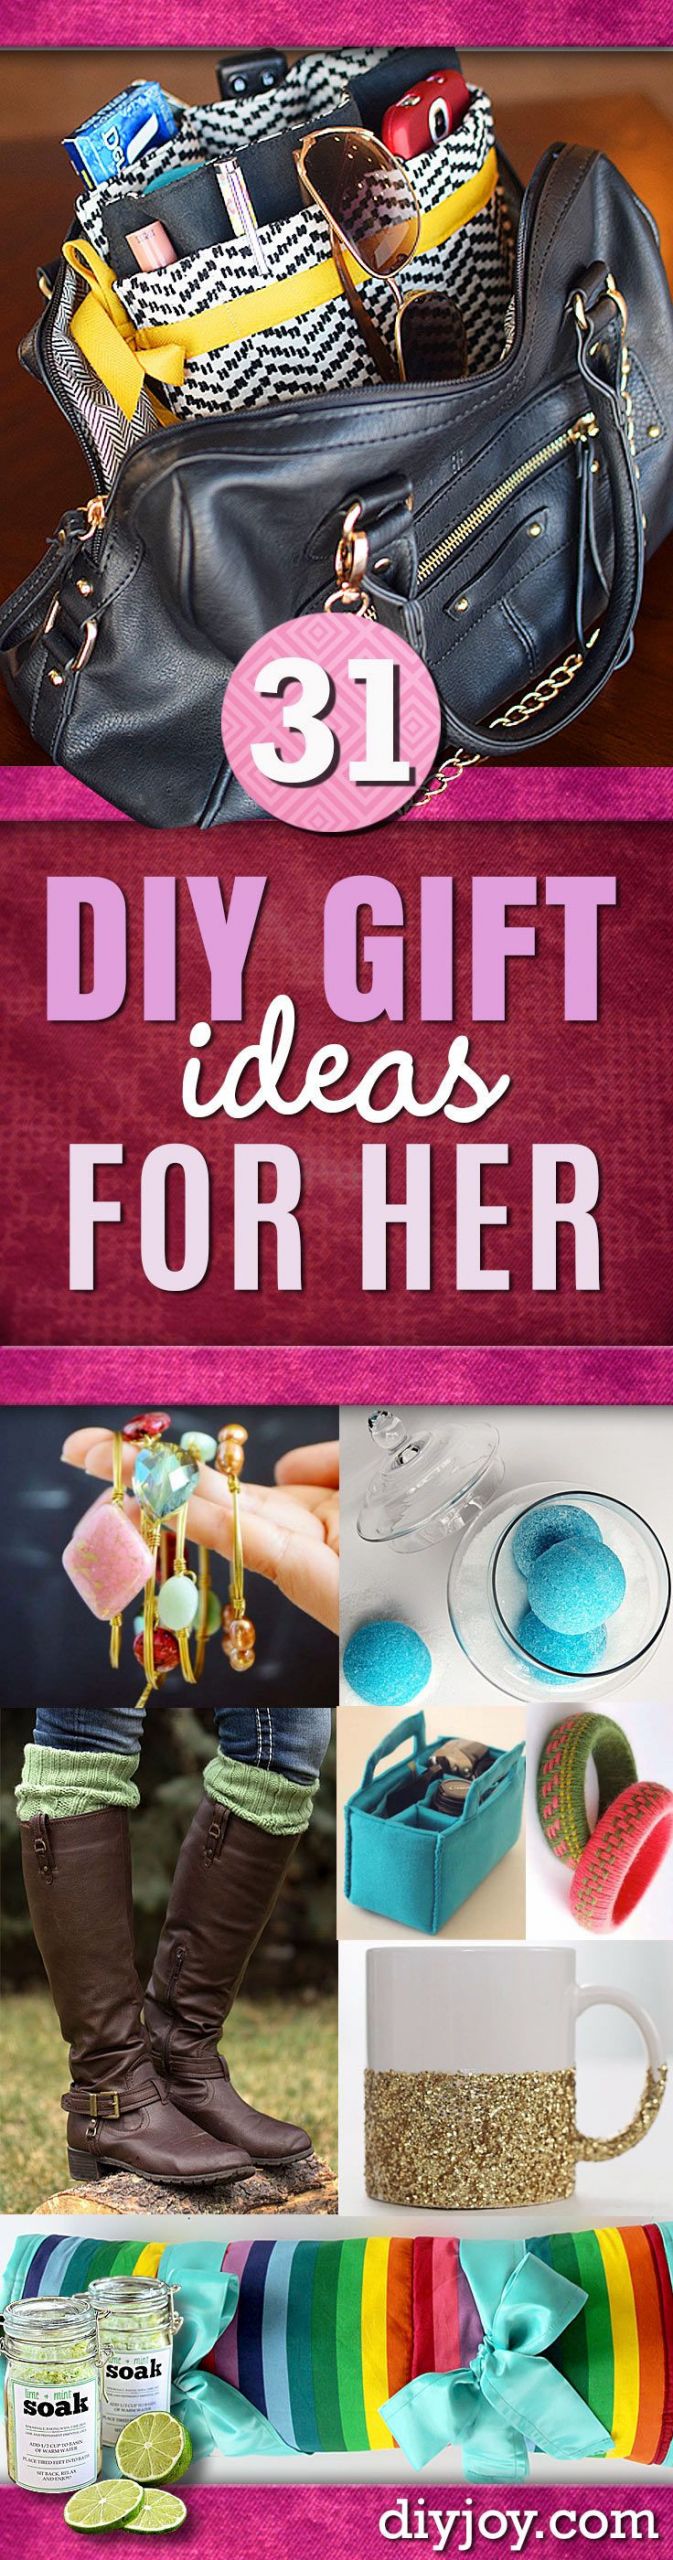 Christmas Gift Ideas For Girlfriends
 Super Special DIY Gift Ideas for Her DIY JOY